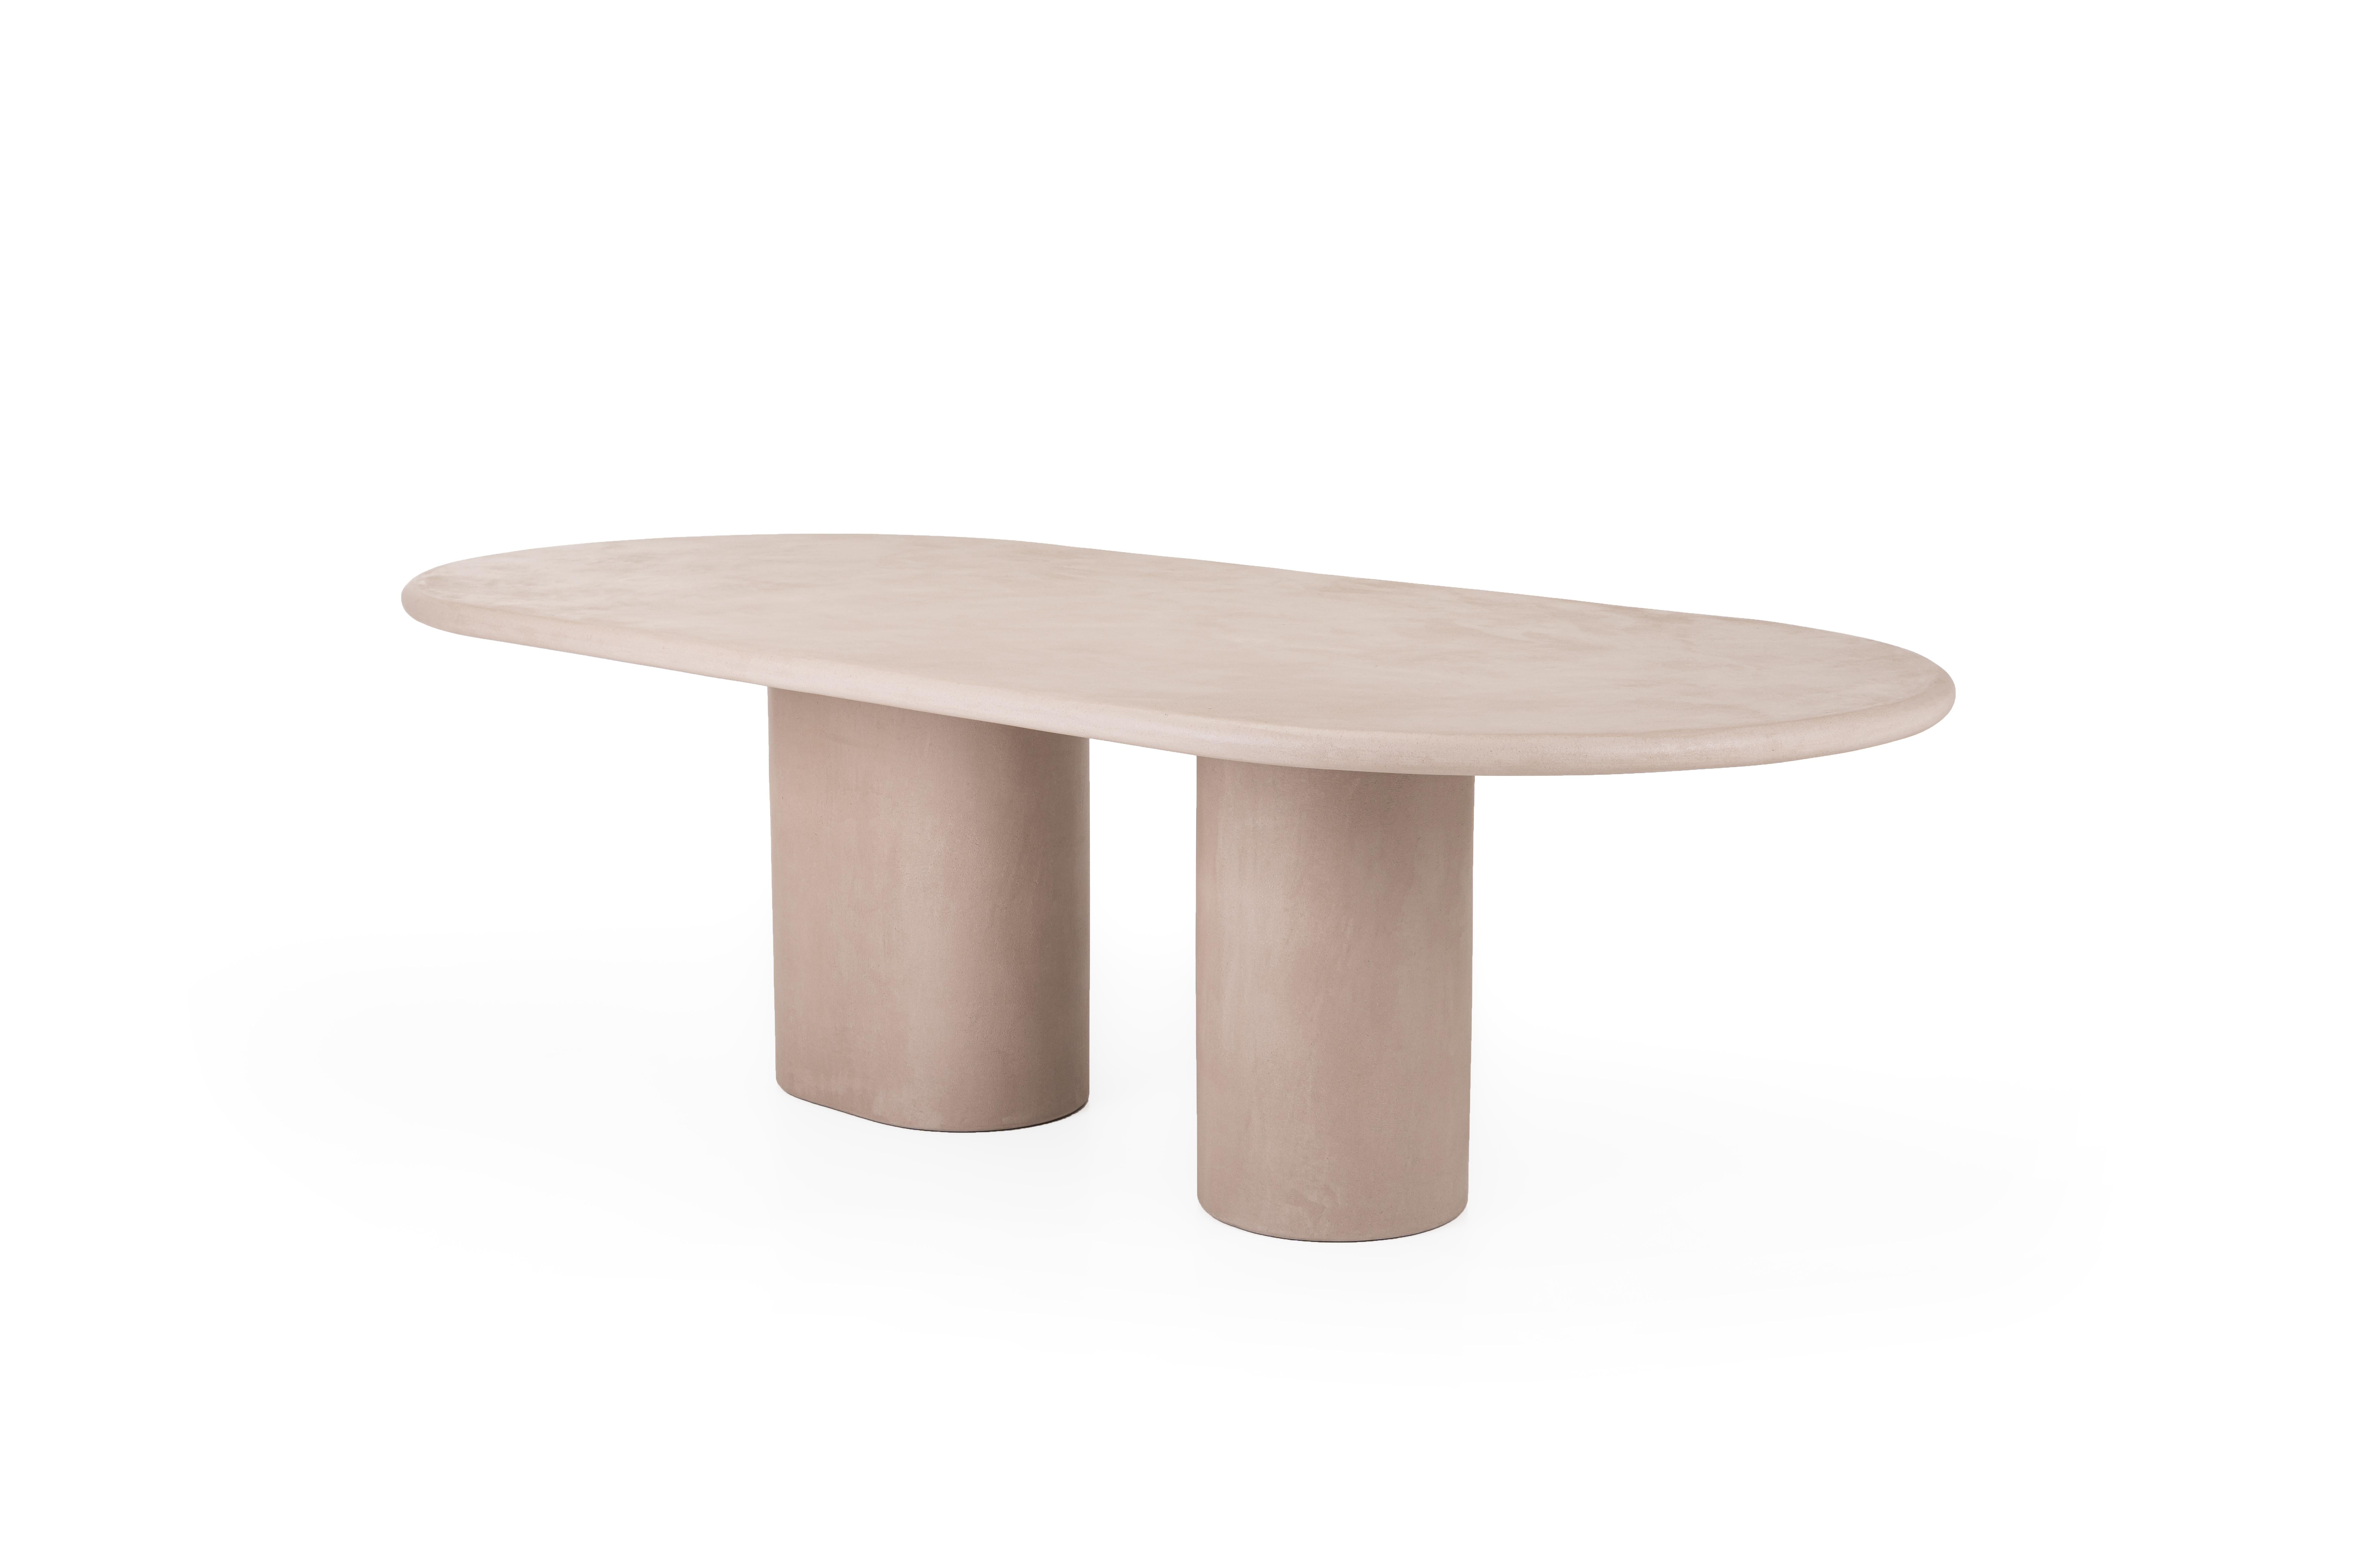 Natural Plaster Dining Table "Column" 280 by Isabelle Beaumont